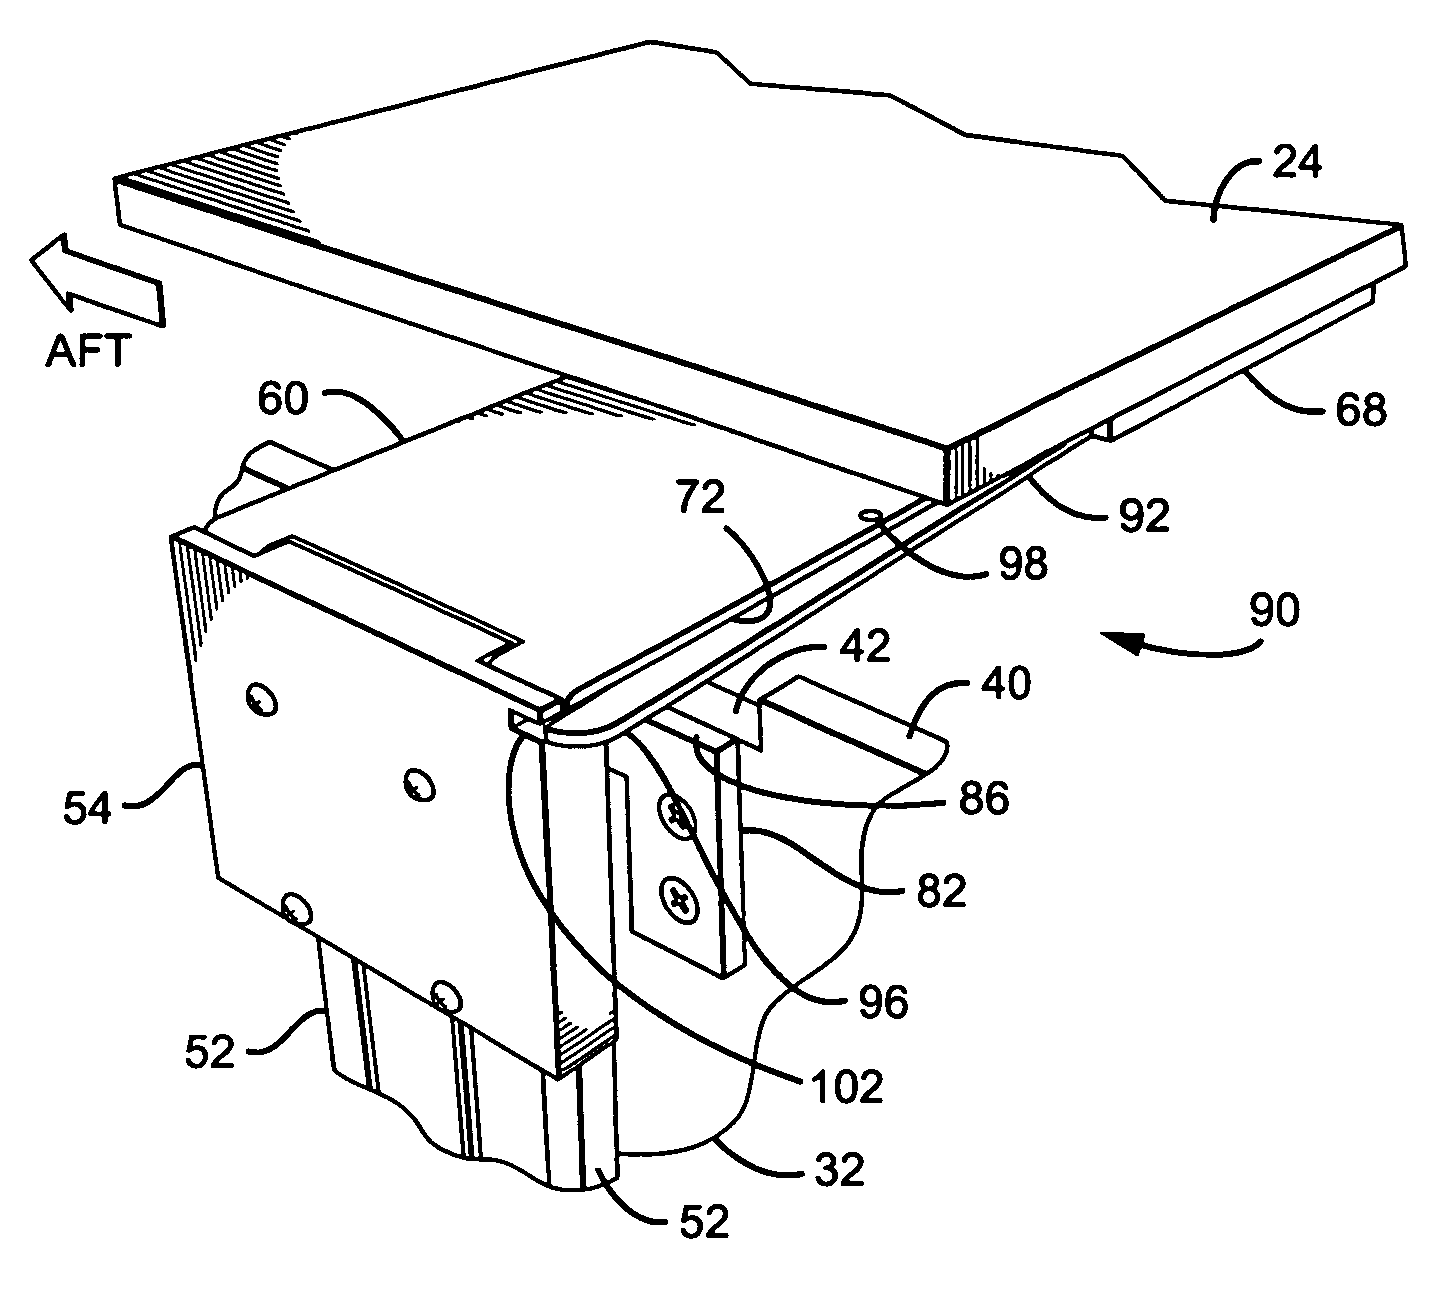 Stowable table assembly with a tabletop locking mechanism